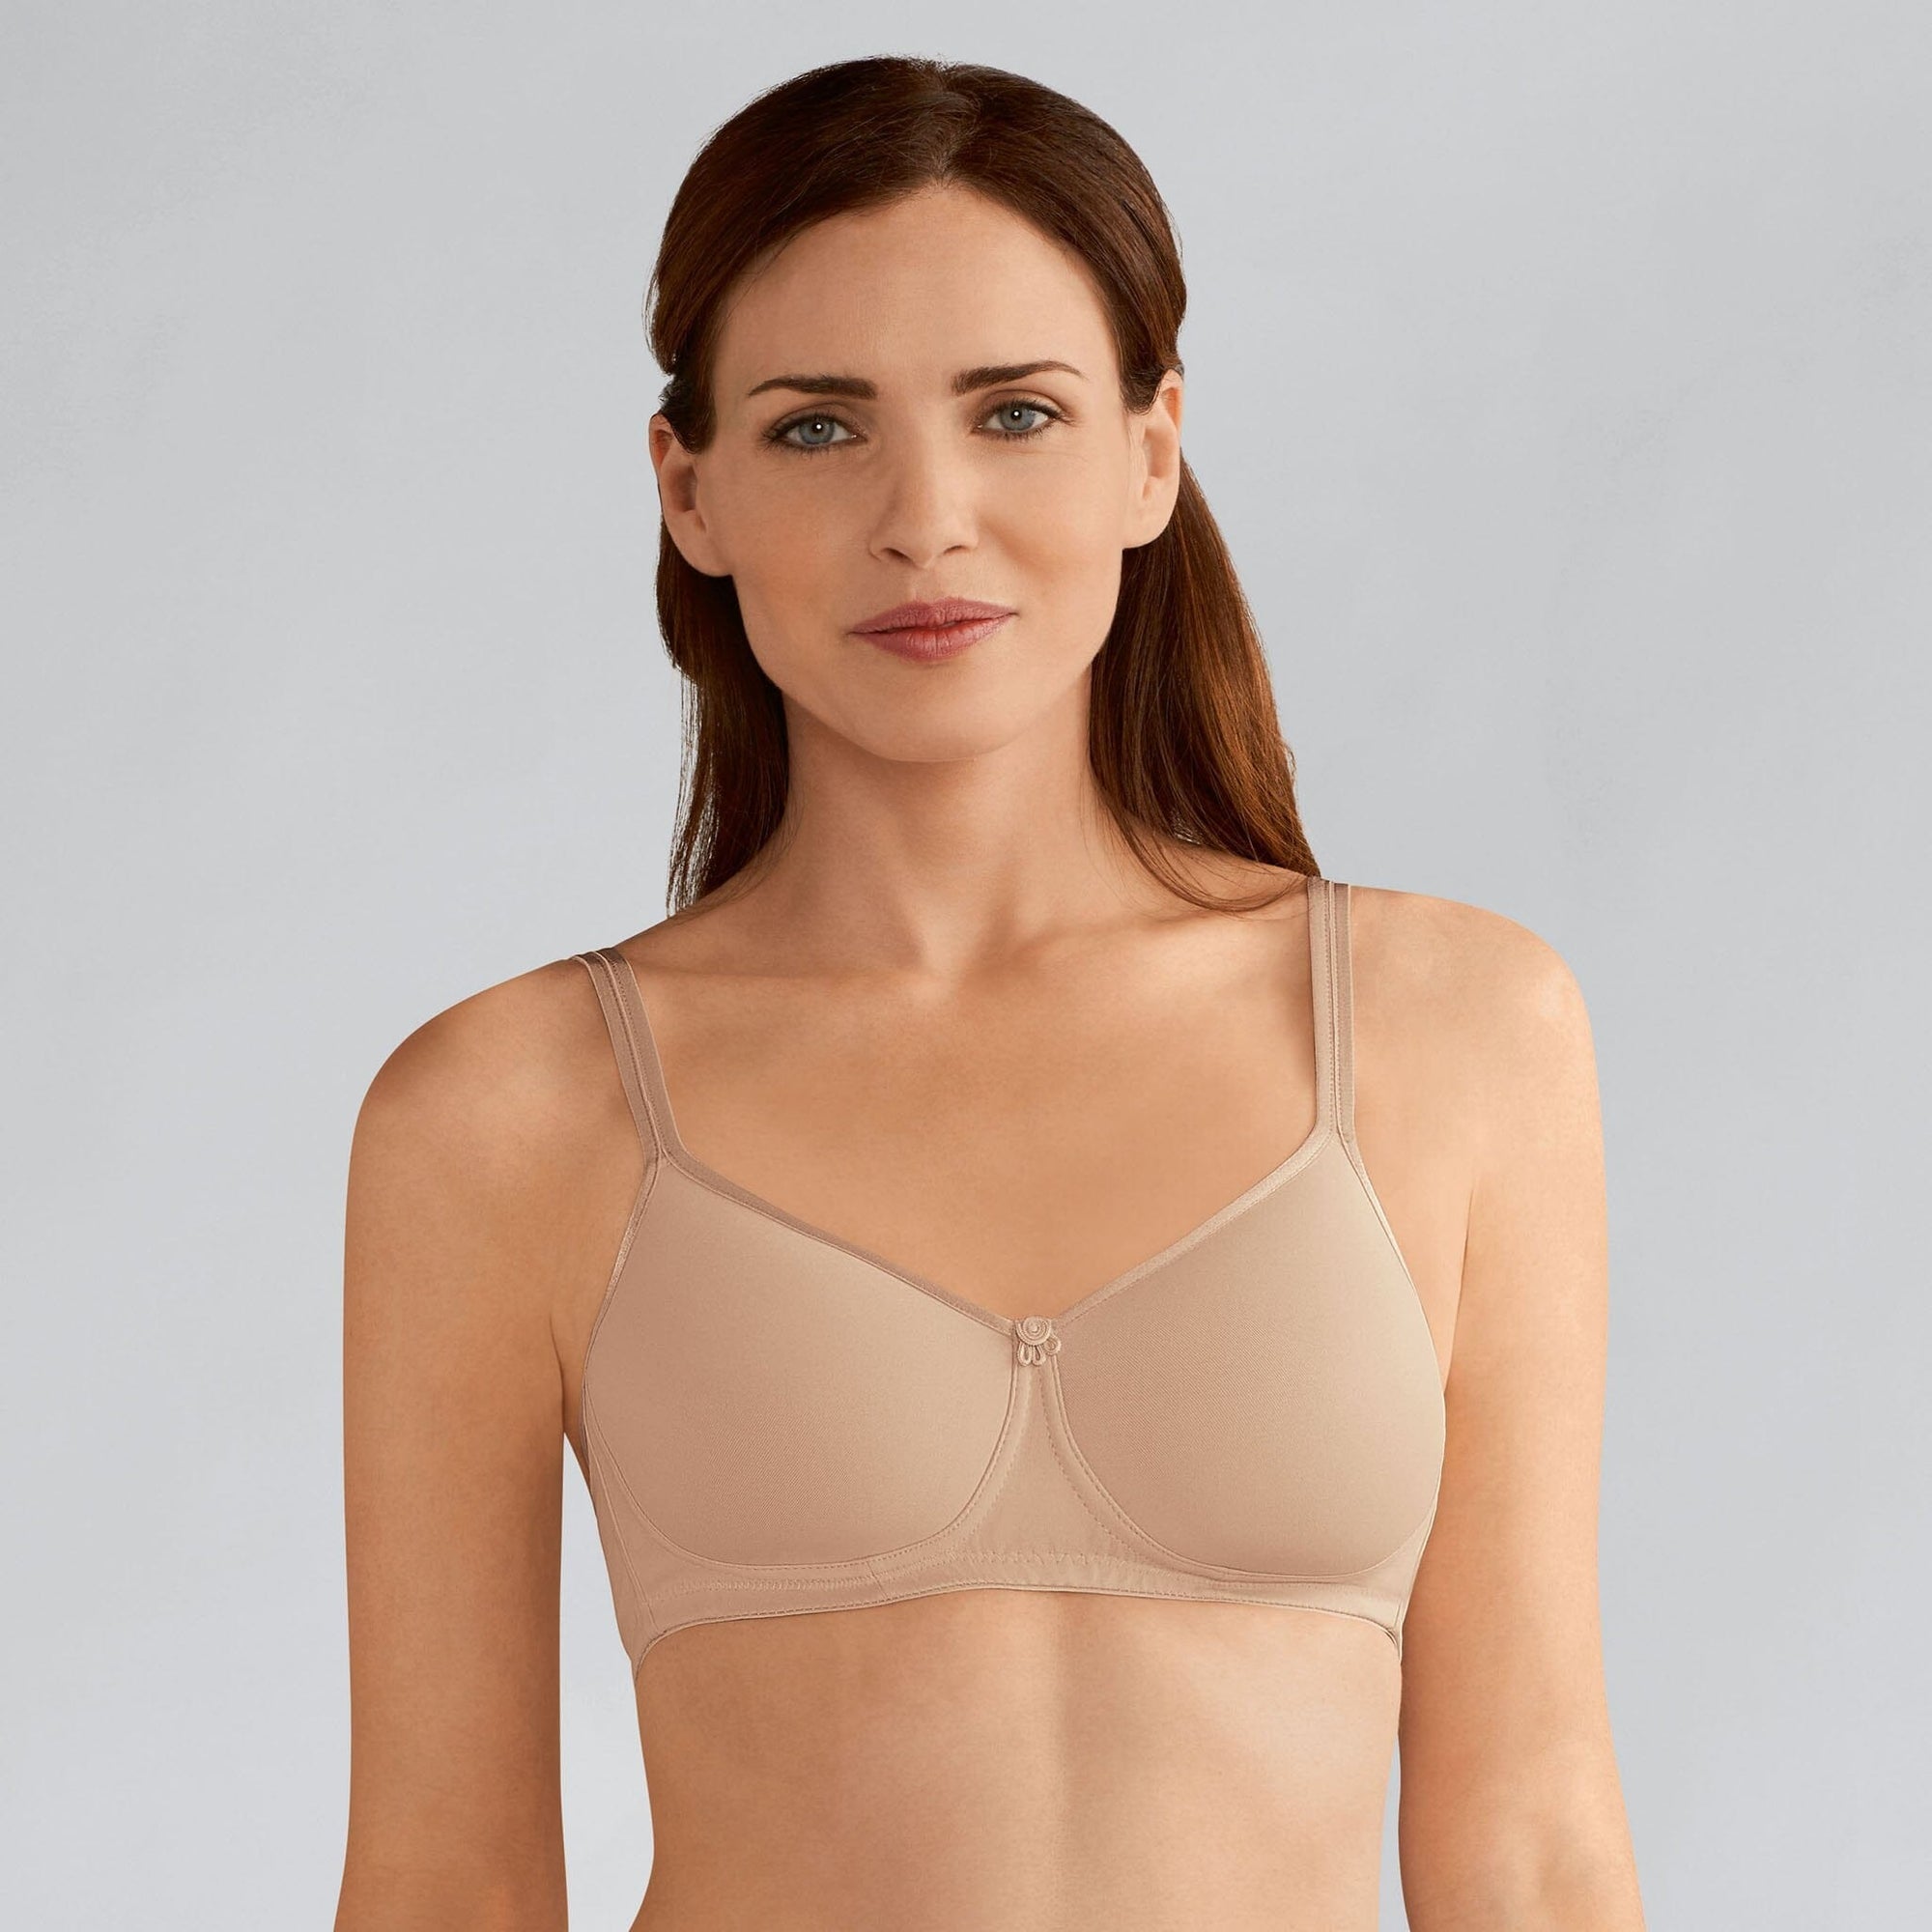 Custom Mastectomy Bras with Built-In Forms - TLC Direct